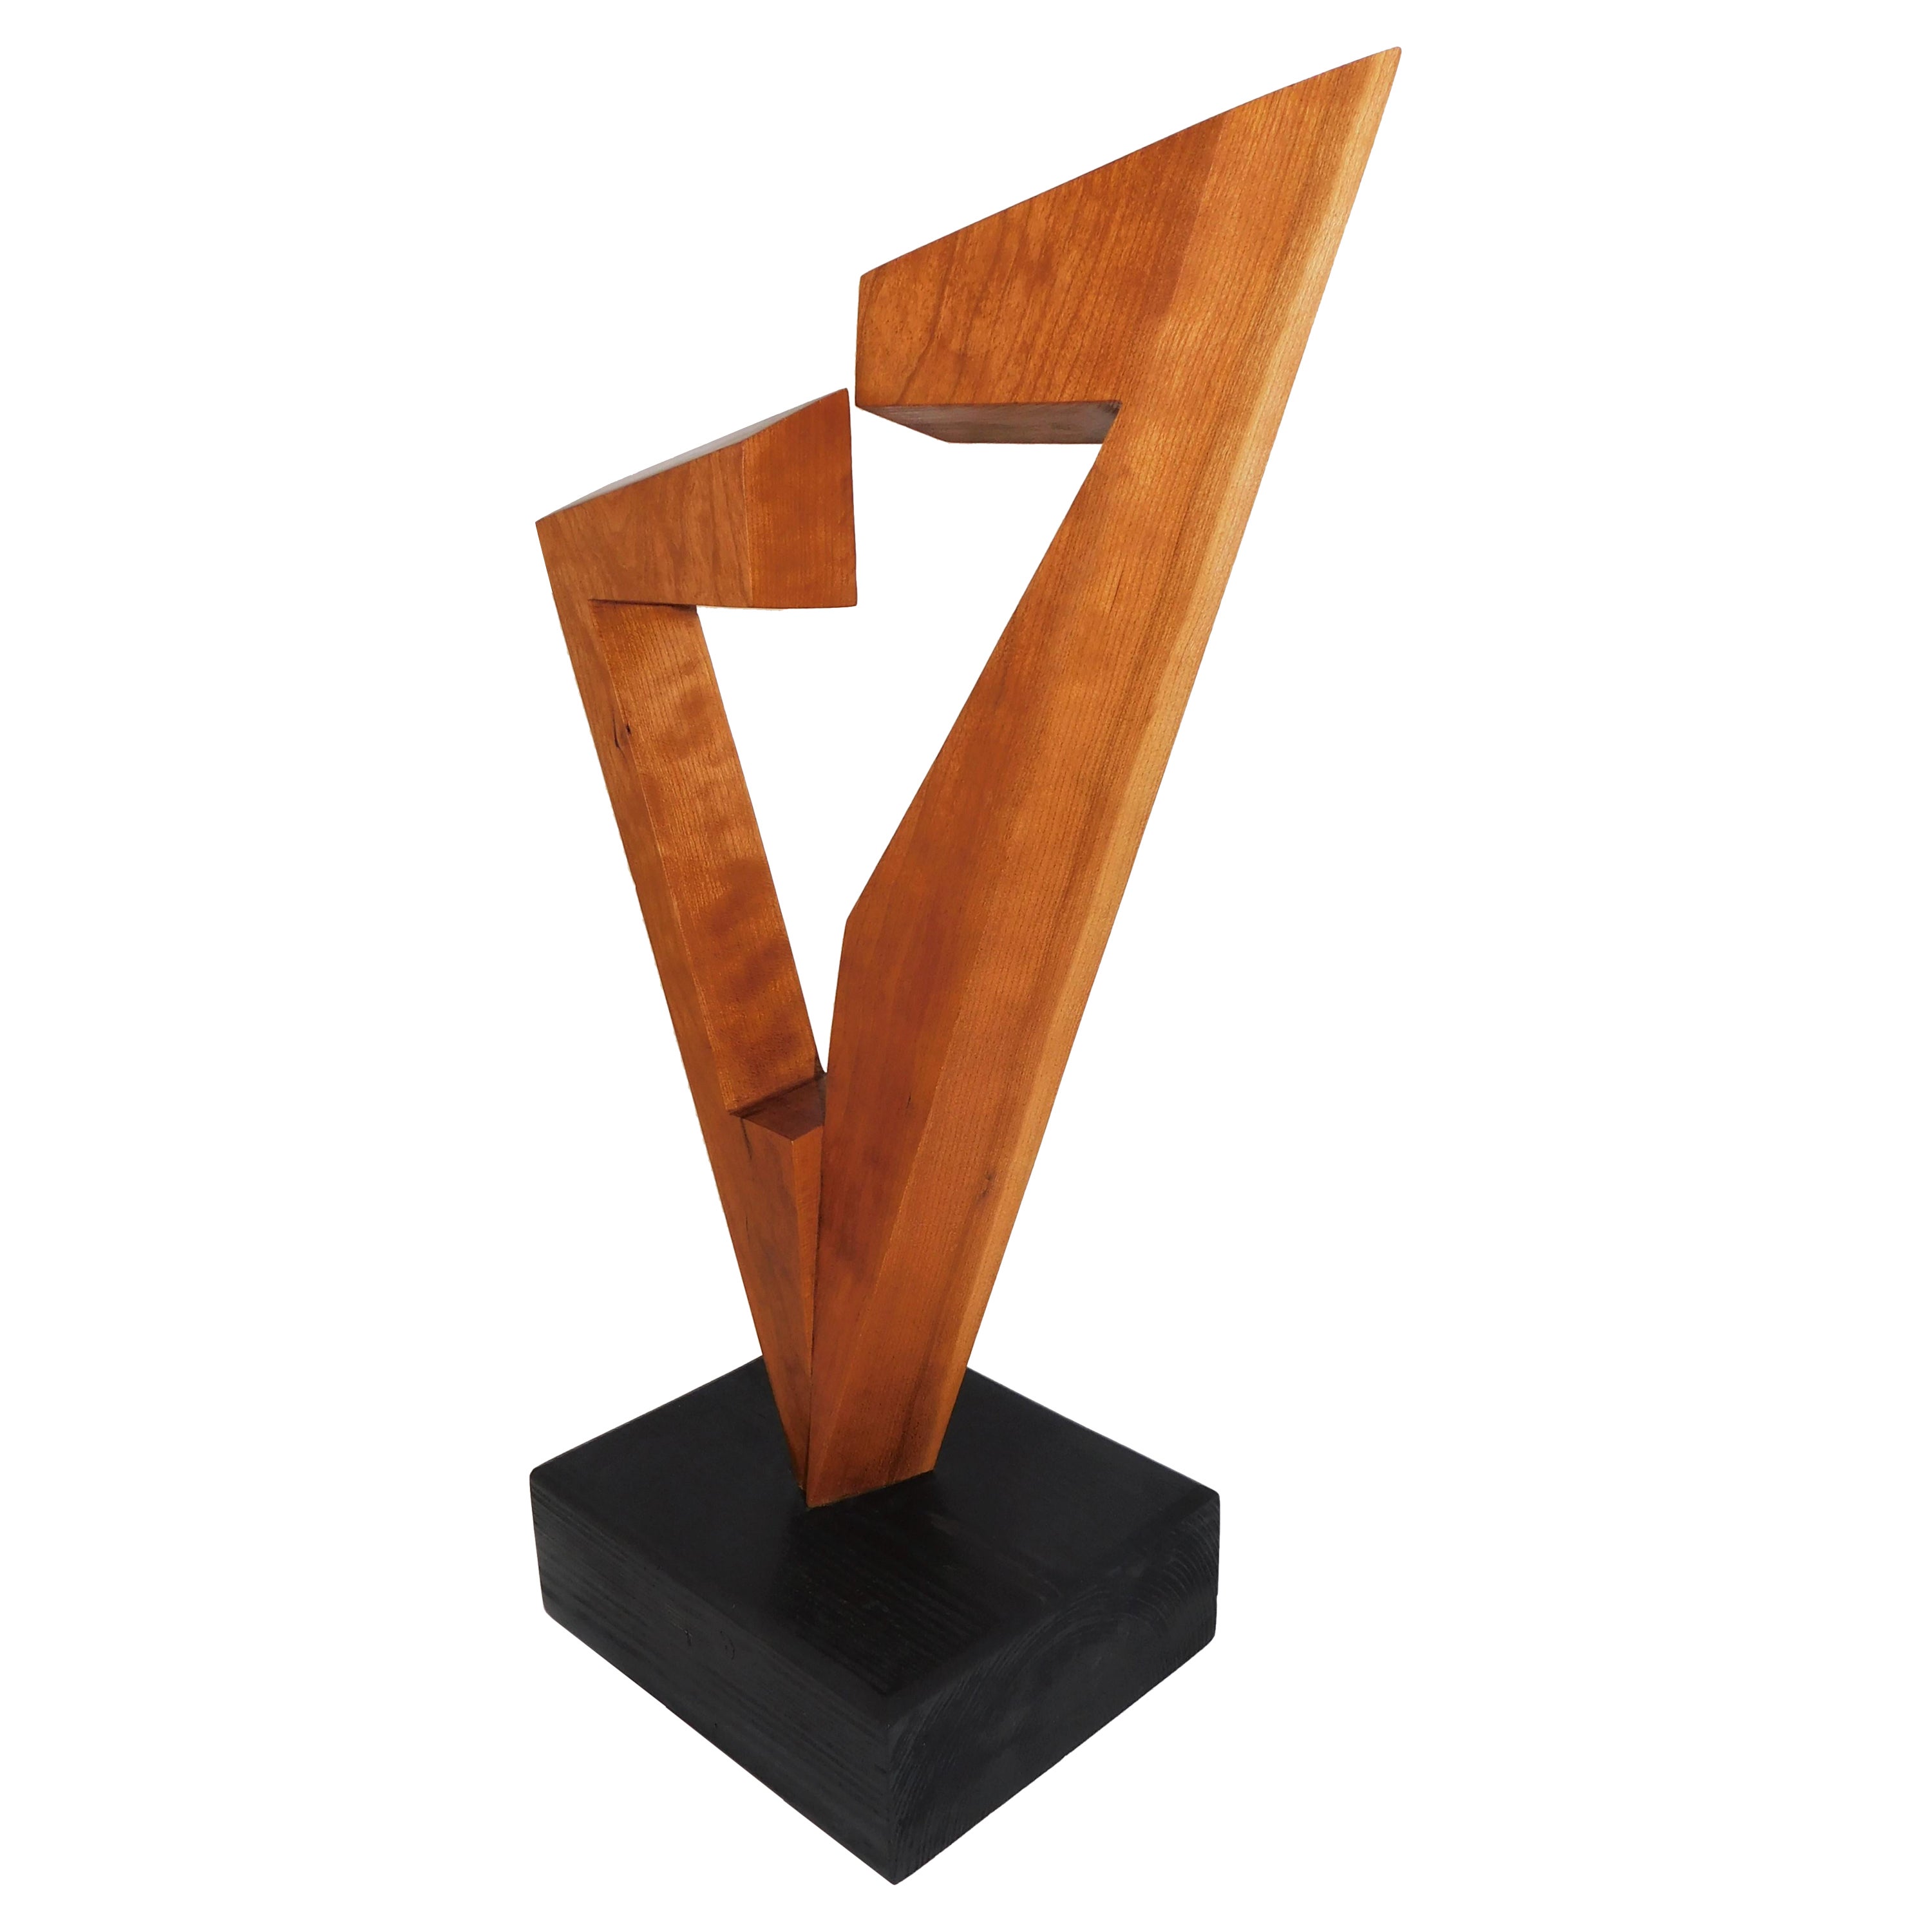 Signed Modern Abstract Constructivist Styled Cherry Wood Sculpture on Base